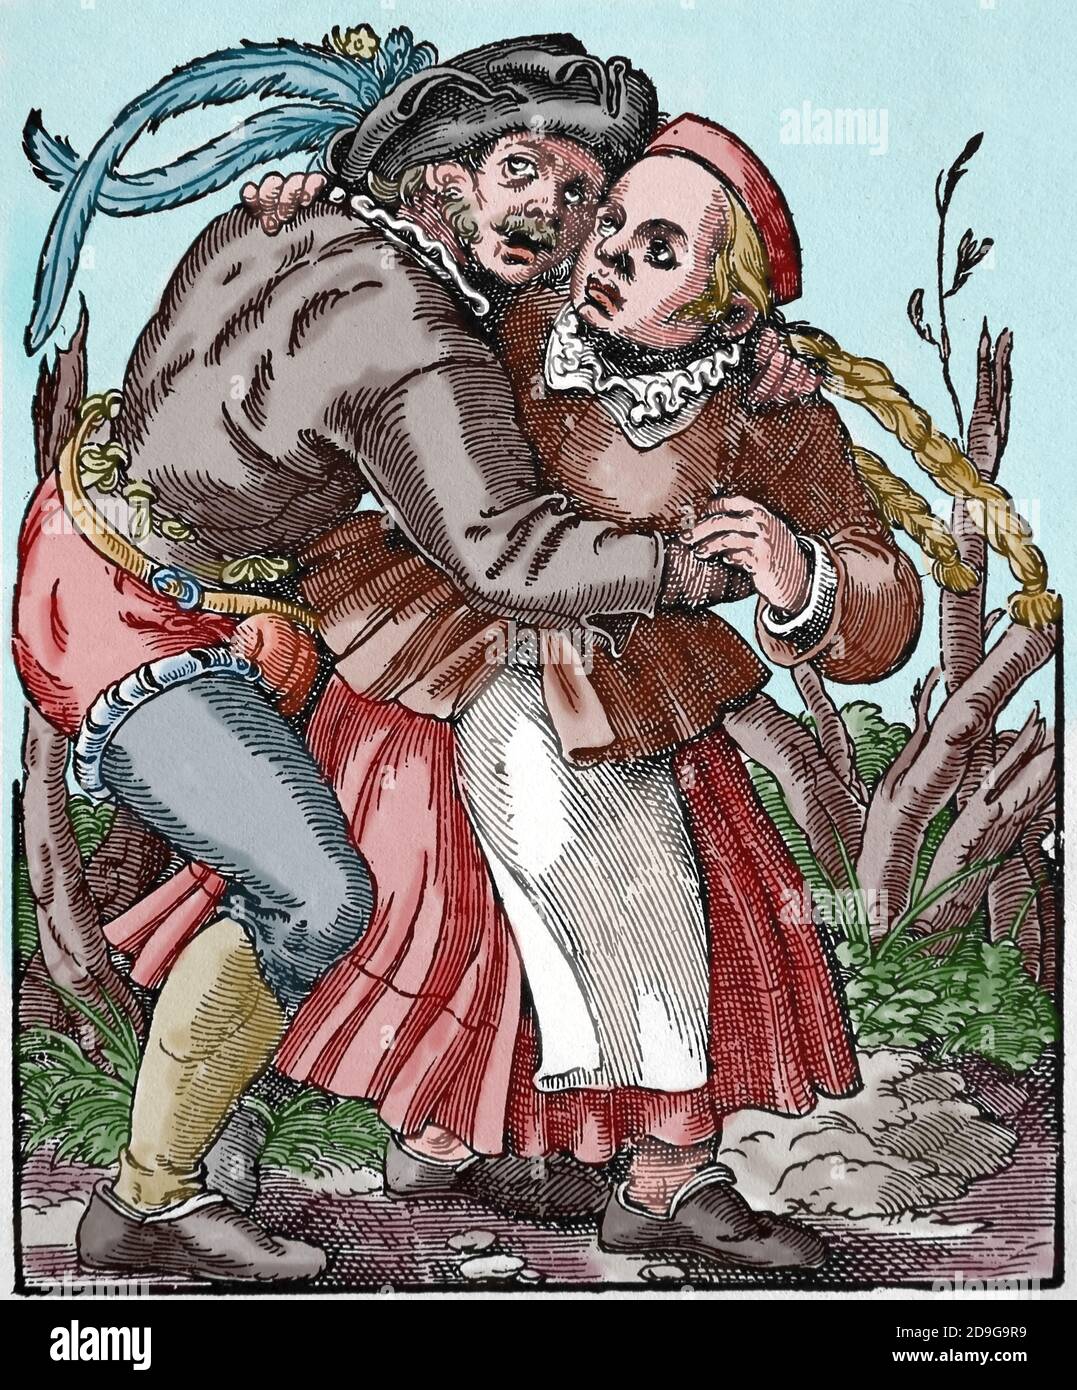 Europe. Renaissance era. 16th century. Peasant couple embracing. Engraving by Jost Amman, 1599. Later colouration. Stock Photo